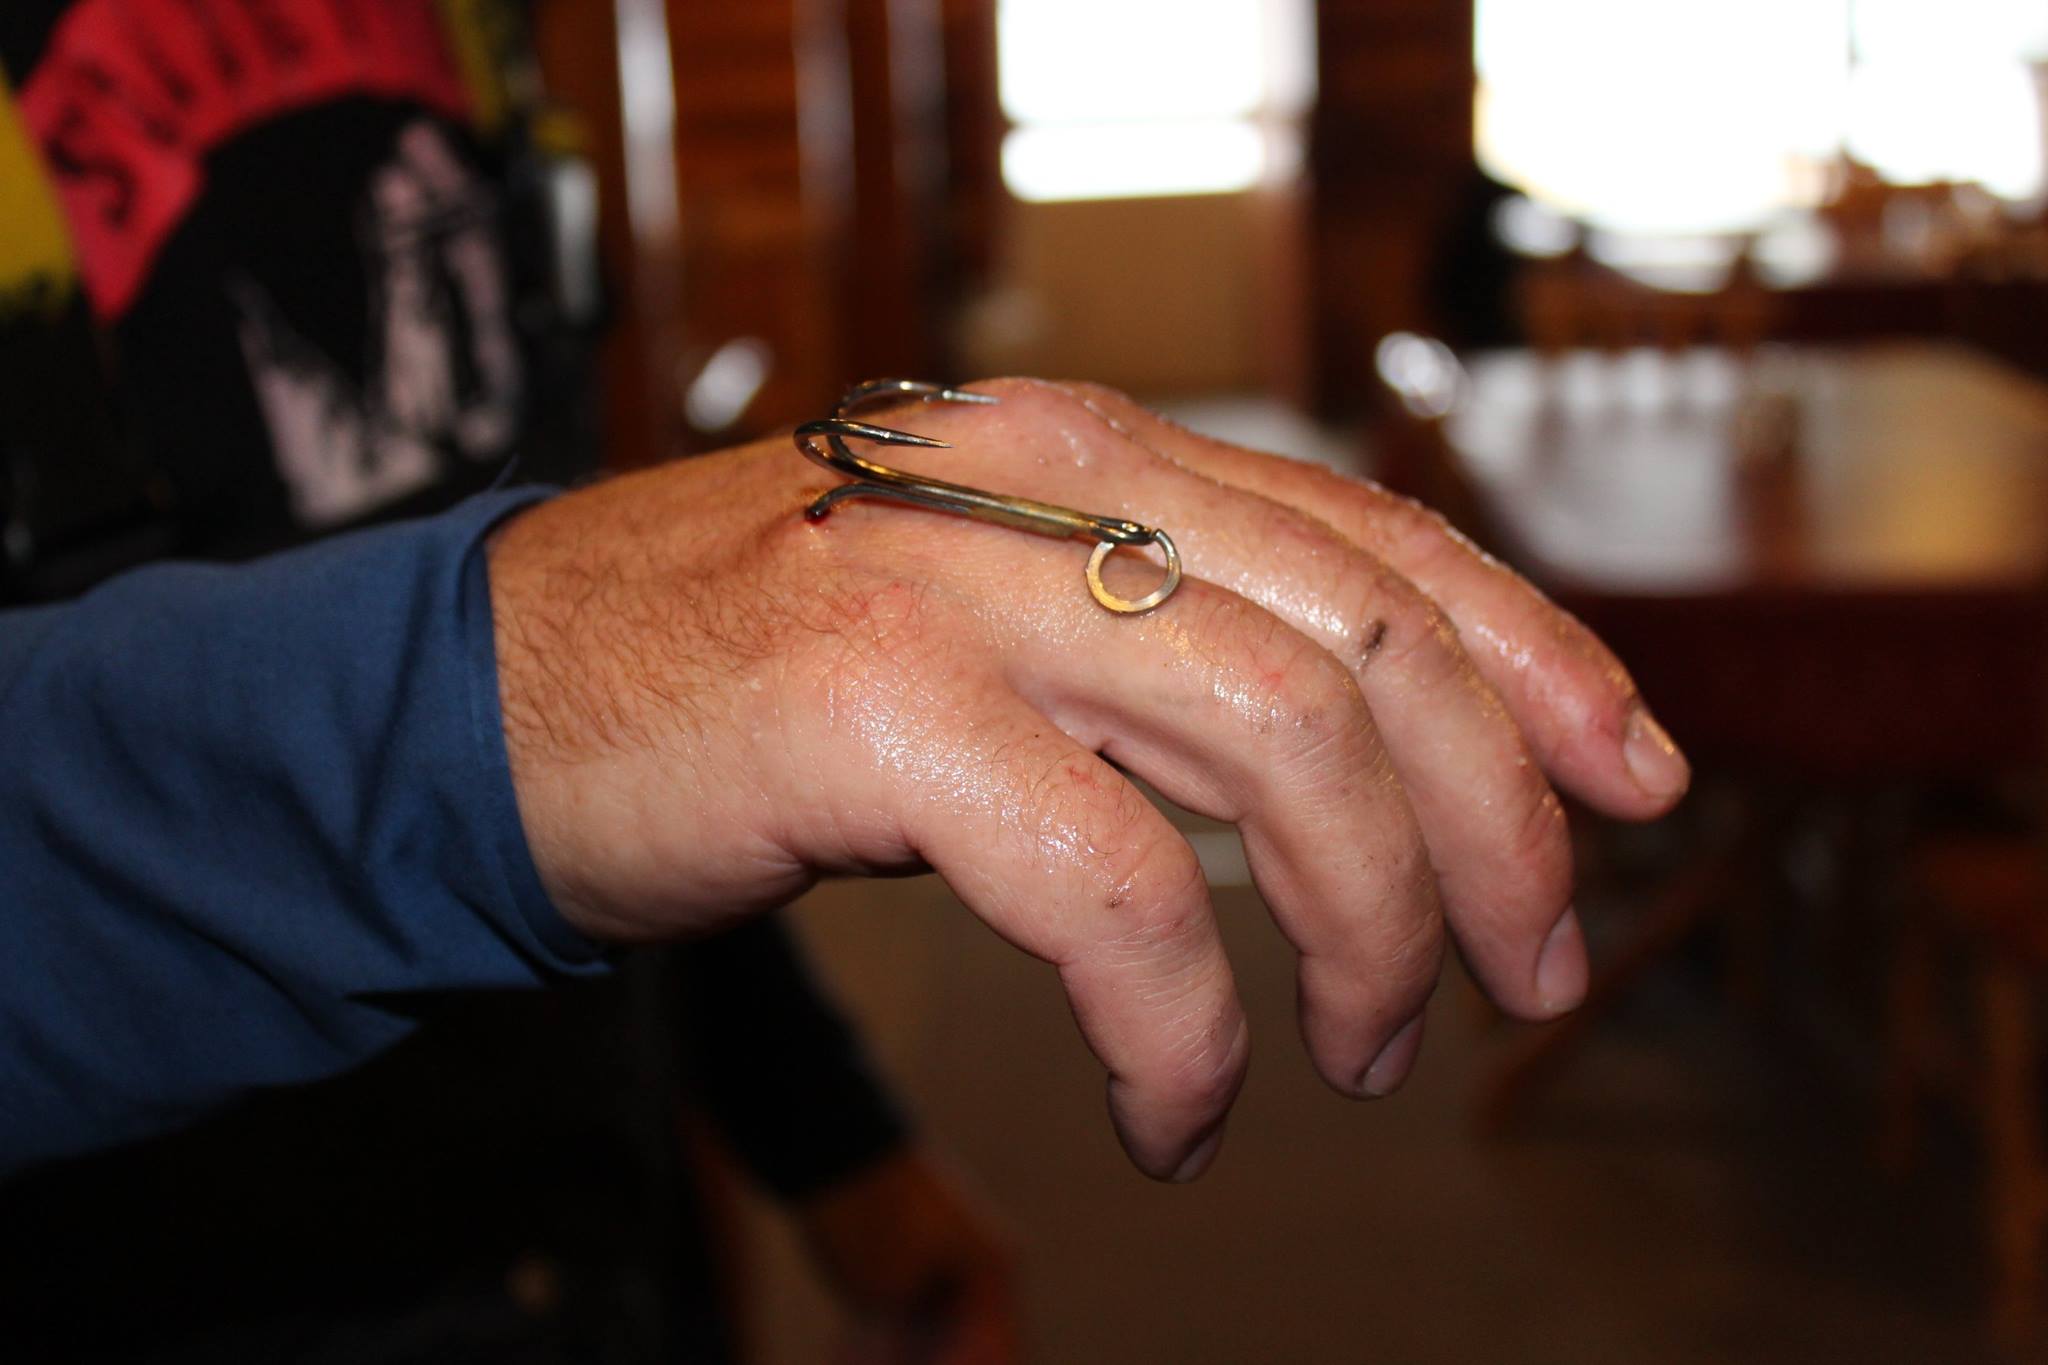 Photos: The Worst Fish Hook Injuries to MeatEater Fans